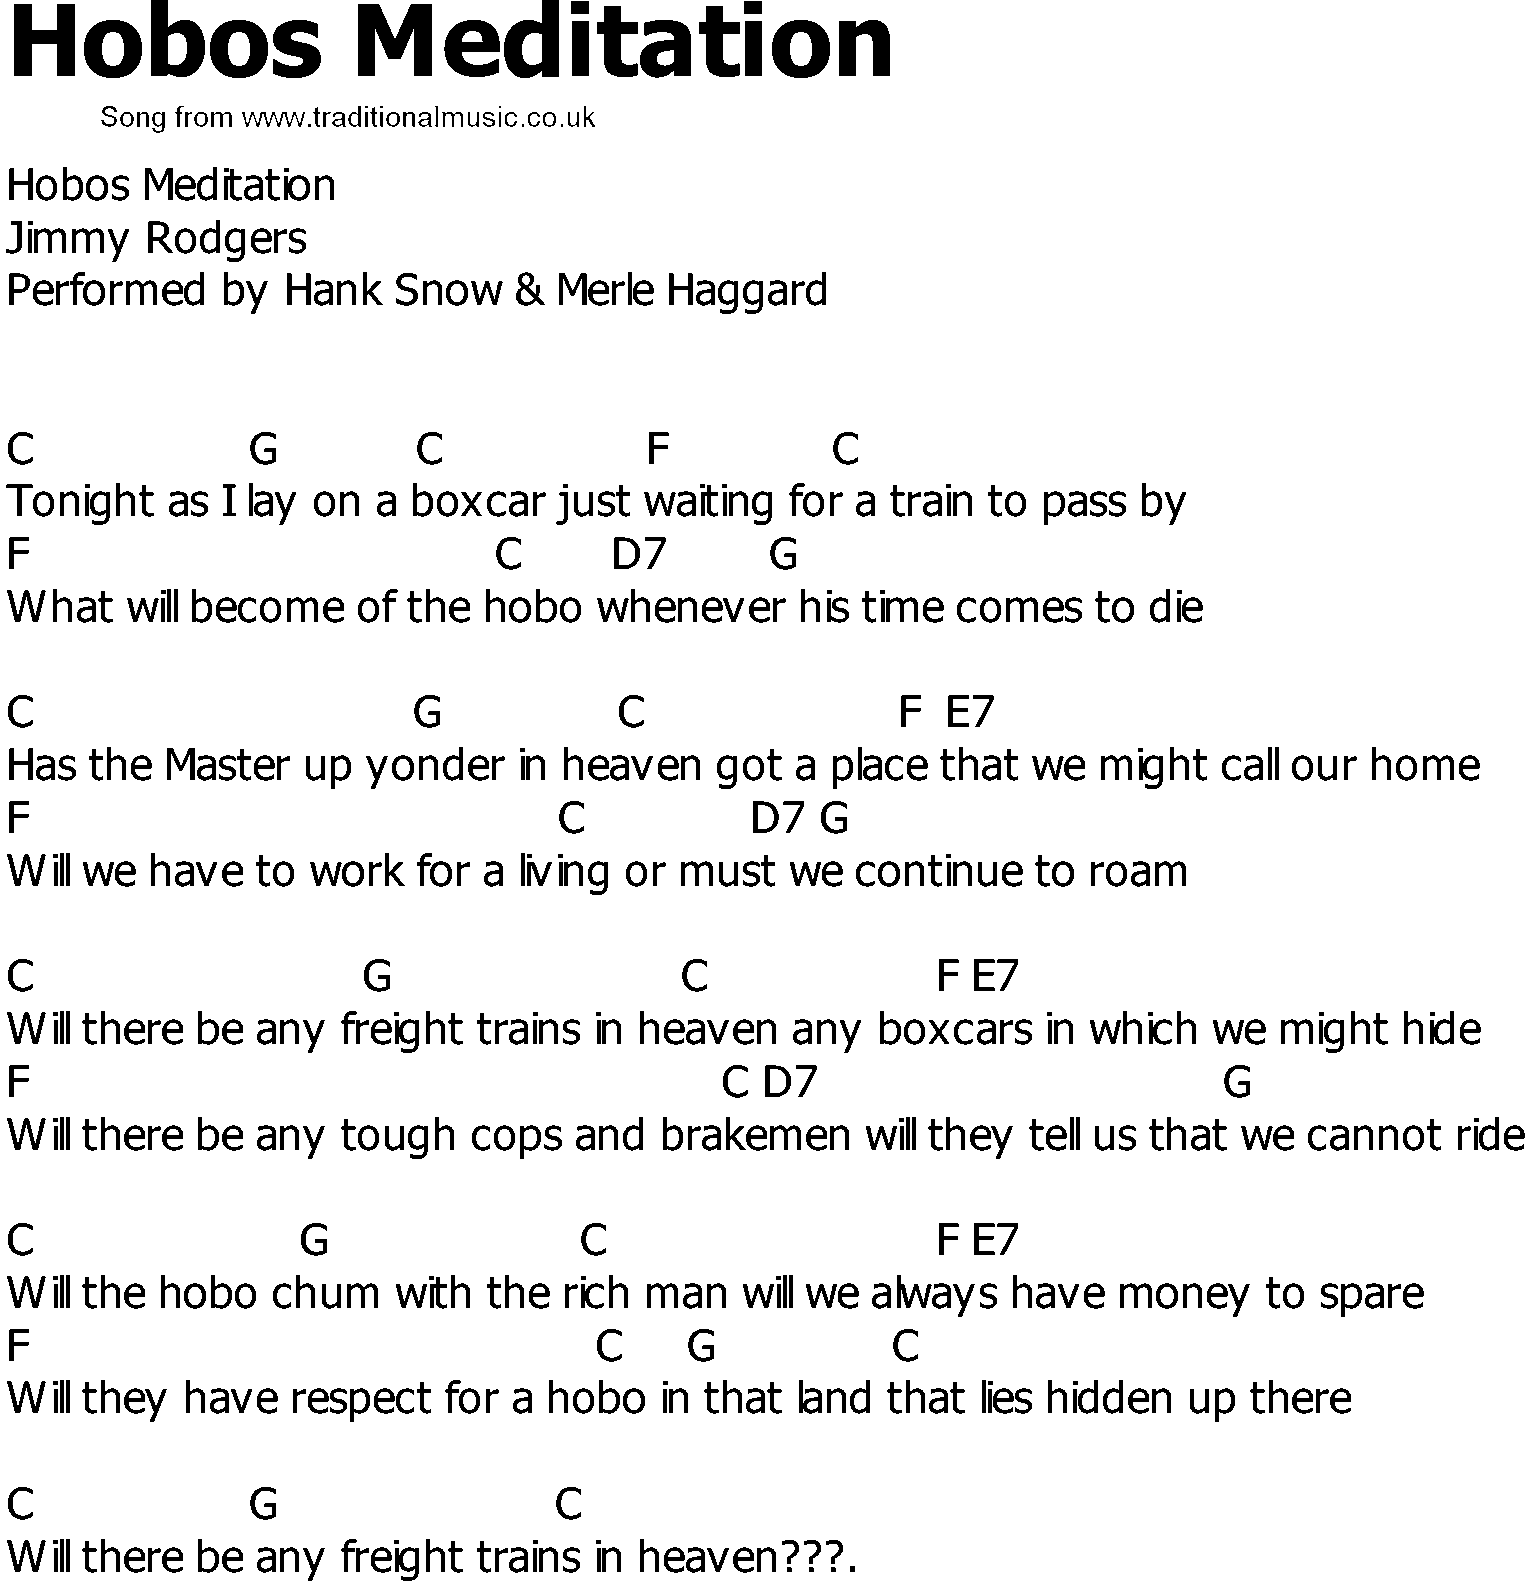 Old Country song lyrics with chords - Hobos Meditation